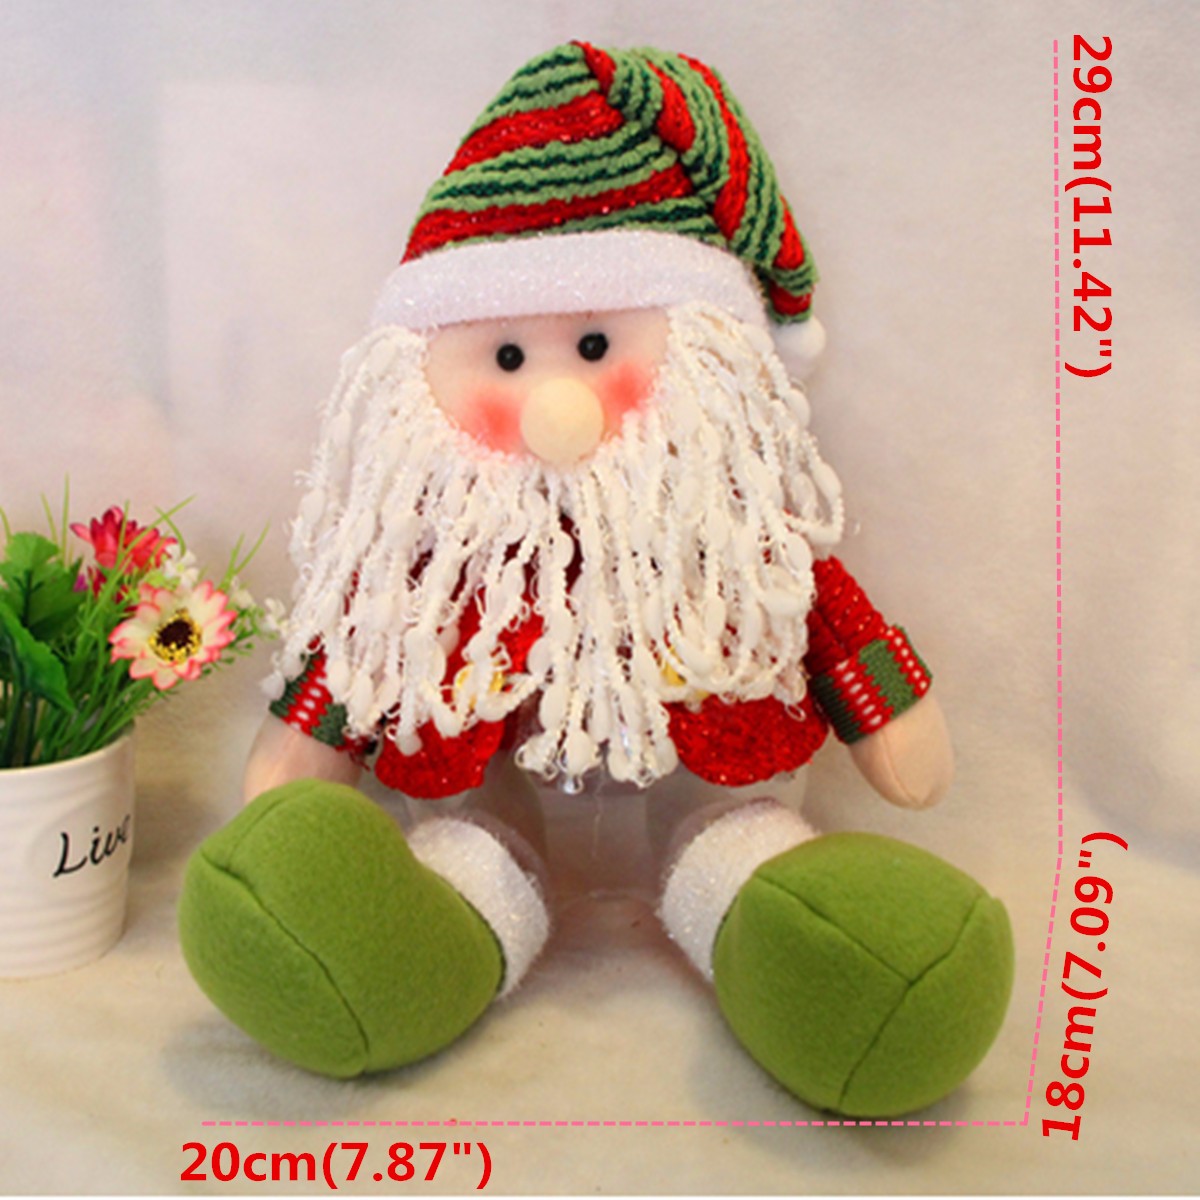 Lovely Snowman Santa Claus Candy Round Jar Bottle Christmas Kid Toy Doll Gift Decor - Photo: 7